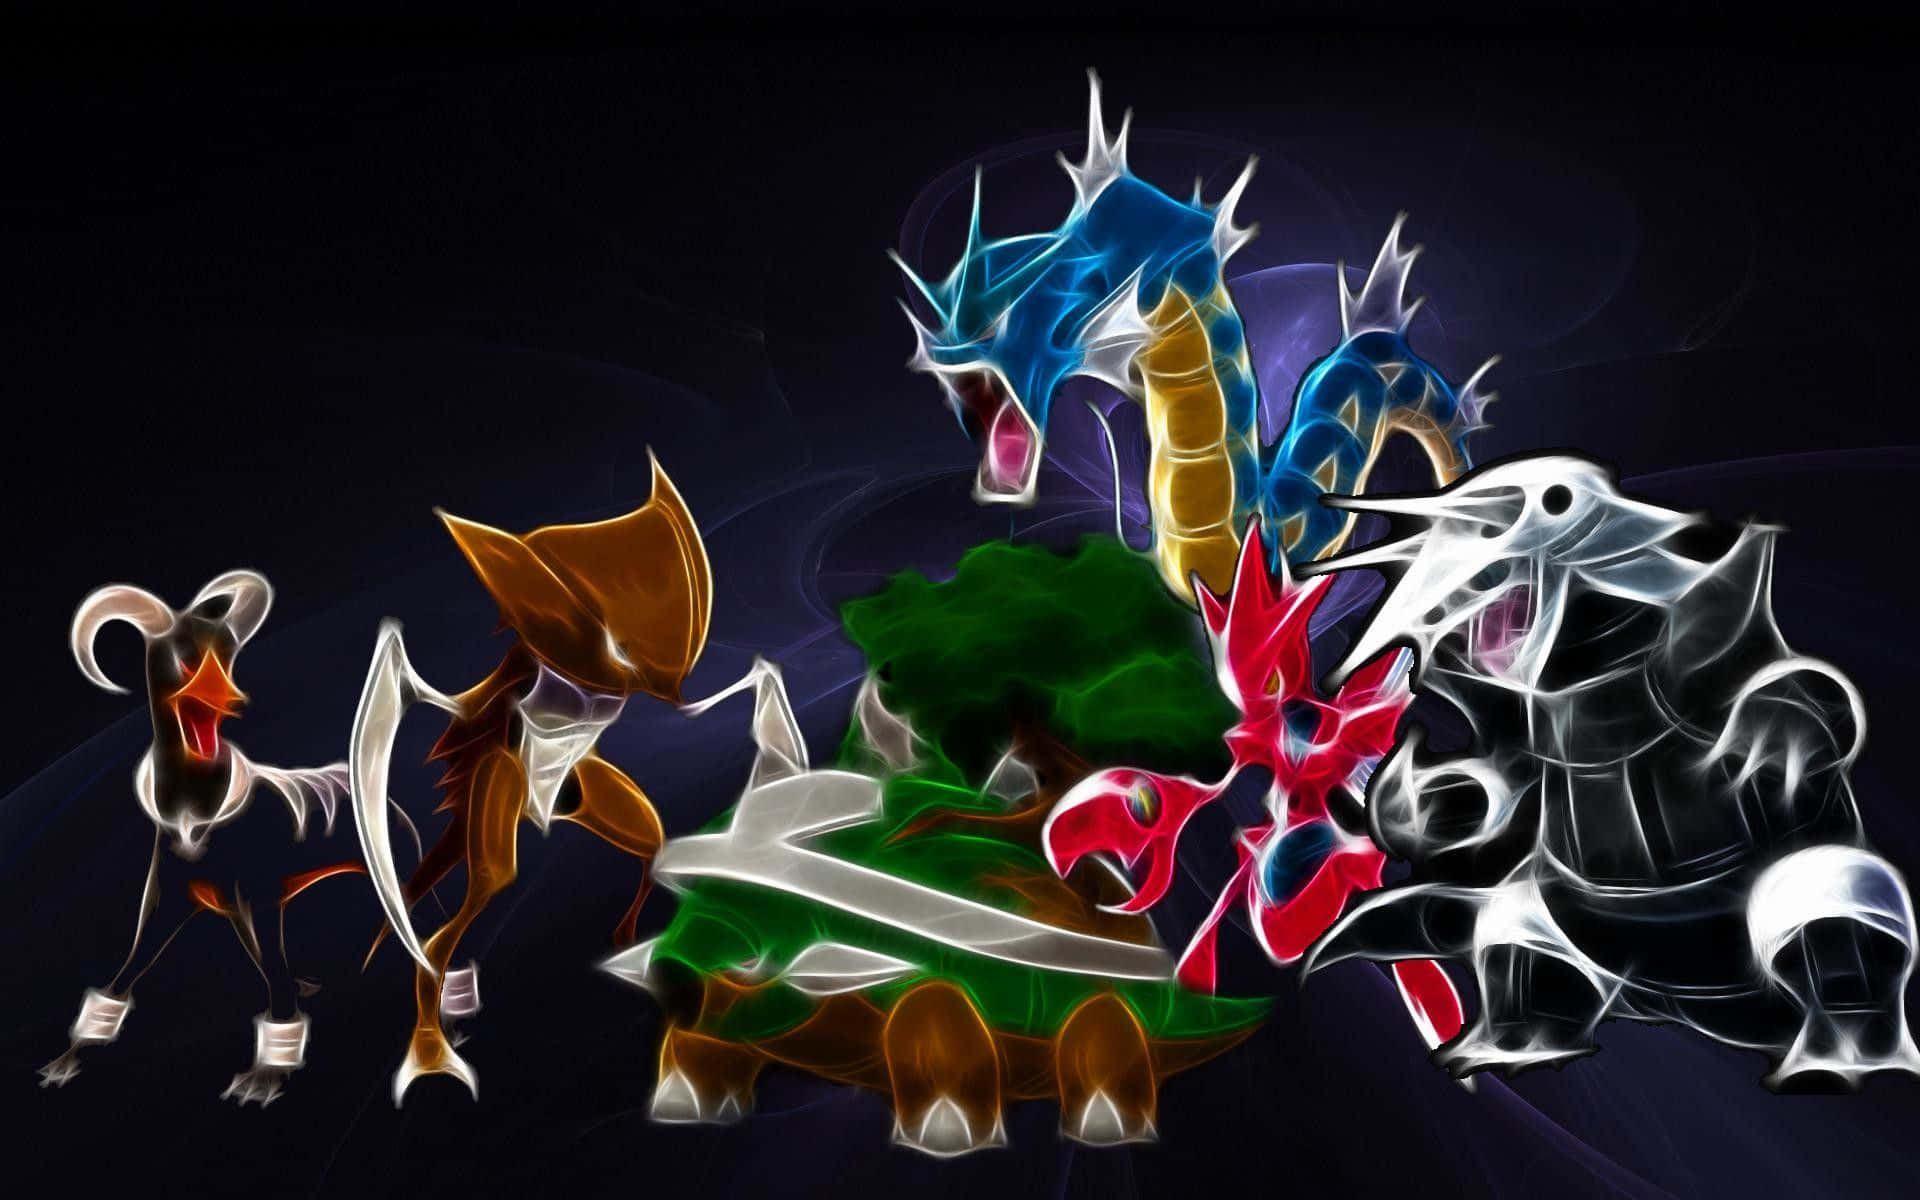 "Battle-ready! Ready to take on any challenger in Pokemon Rumble!" Wallpaper